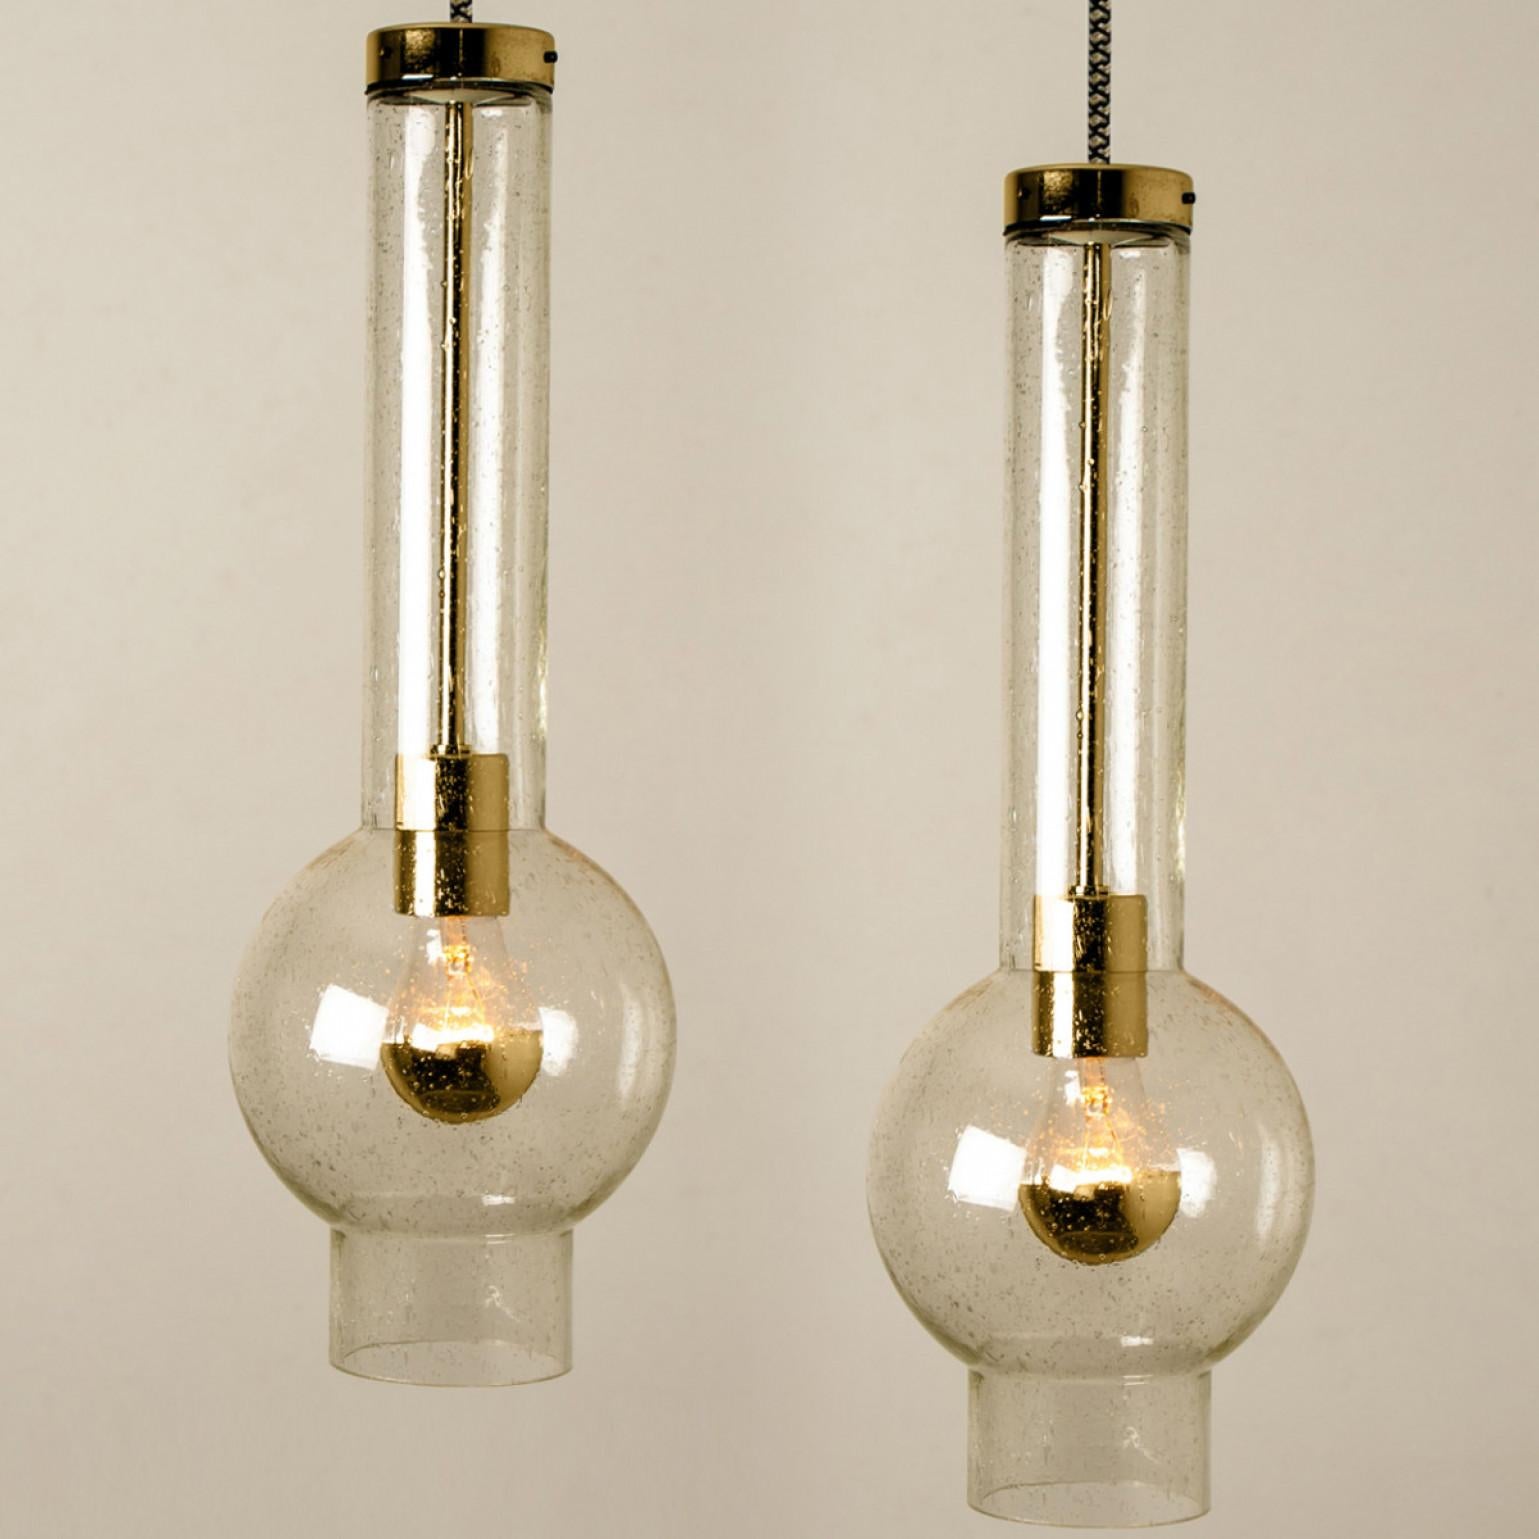 1 of the 7 Blown Glass and Brass Tube Pedant Lights by Staff Leuchten, 1970s For Sale 2